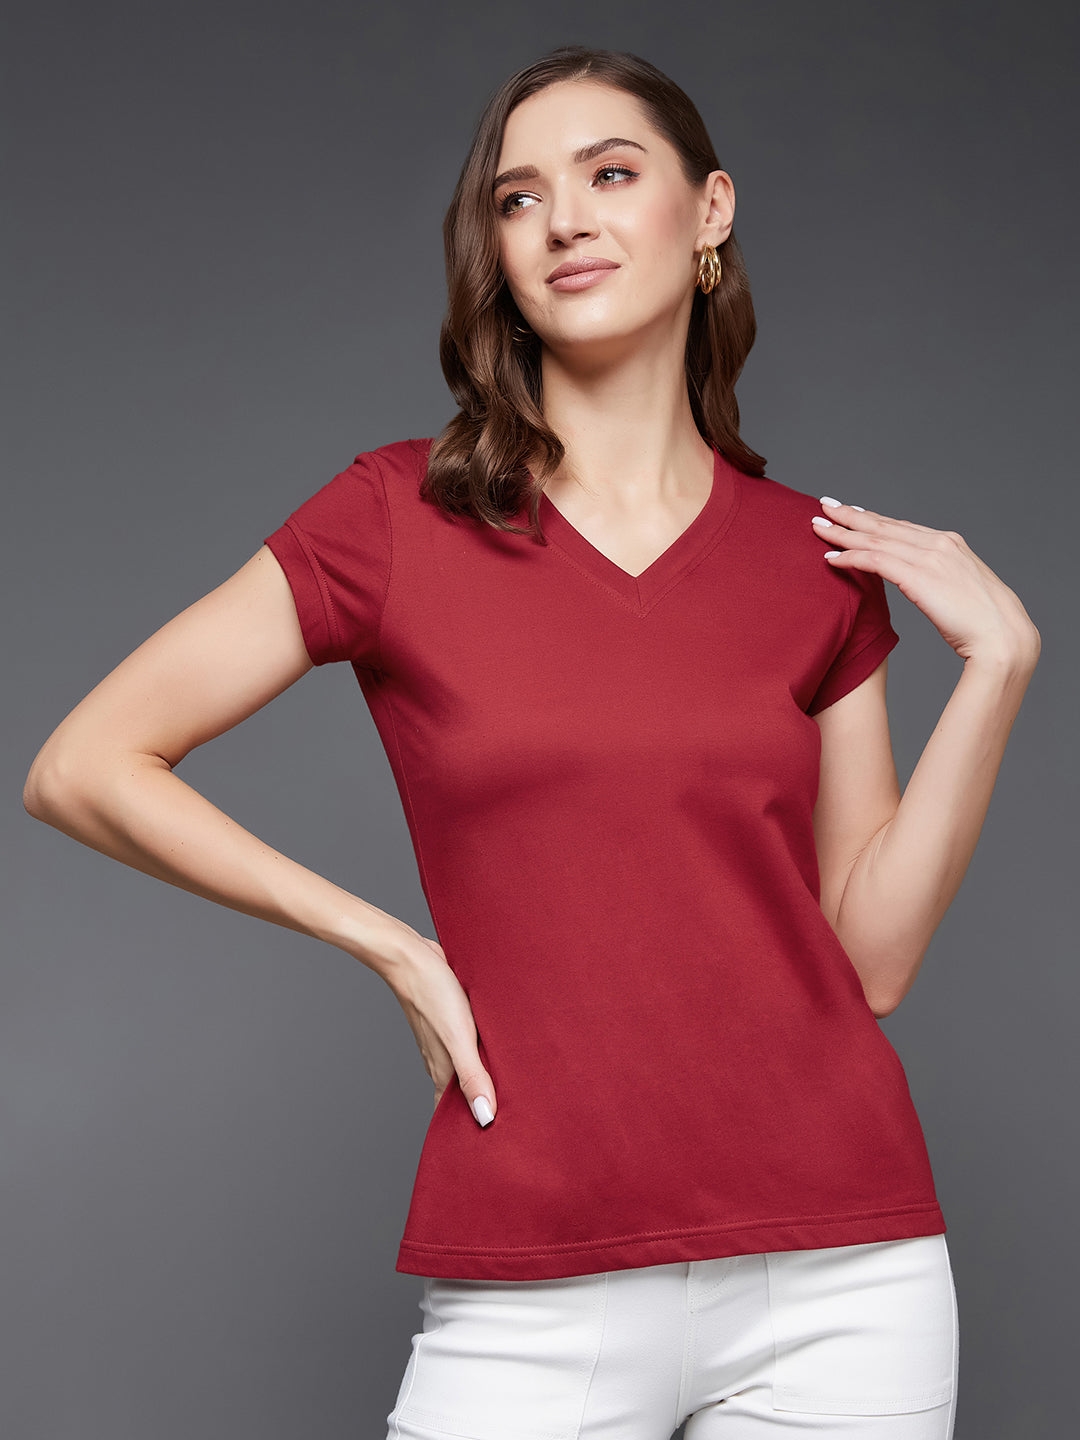 Women's Red Polycotton  Tops